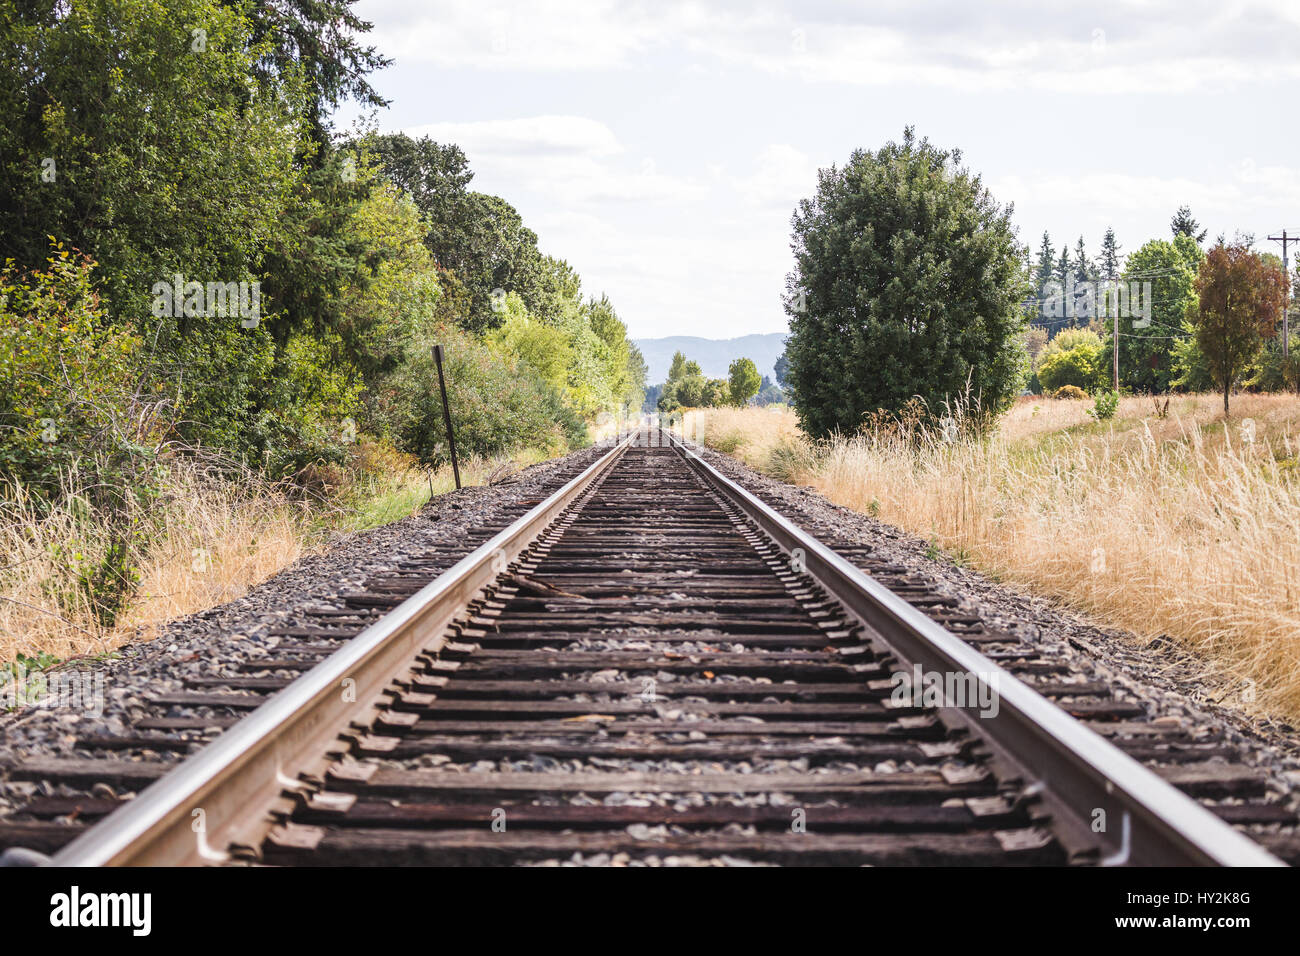 Wood and steel train tracks in a rural area of Oregon, USA. Stock Photo